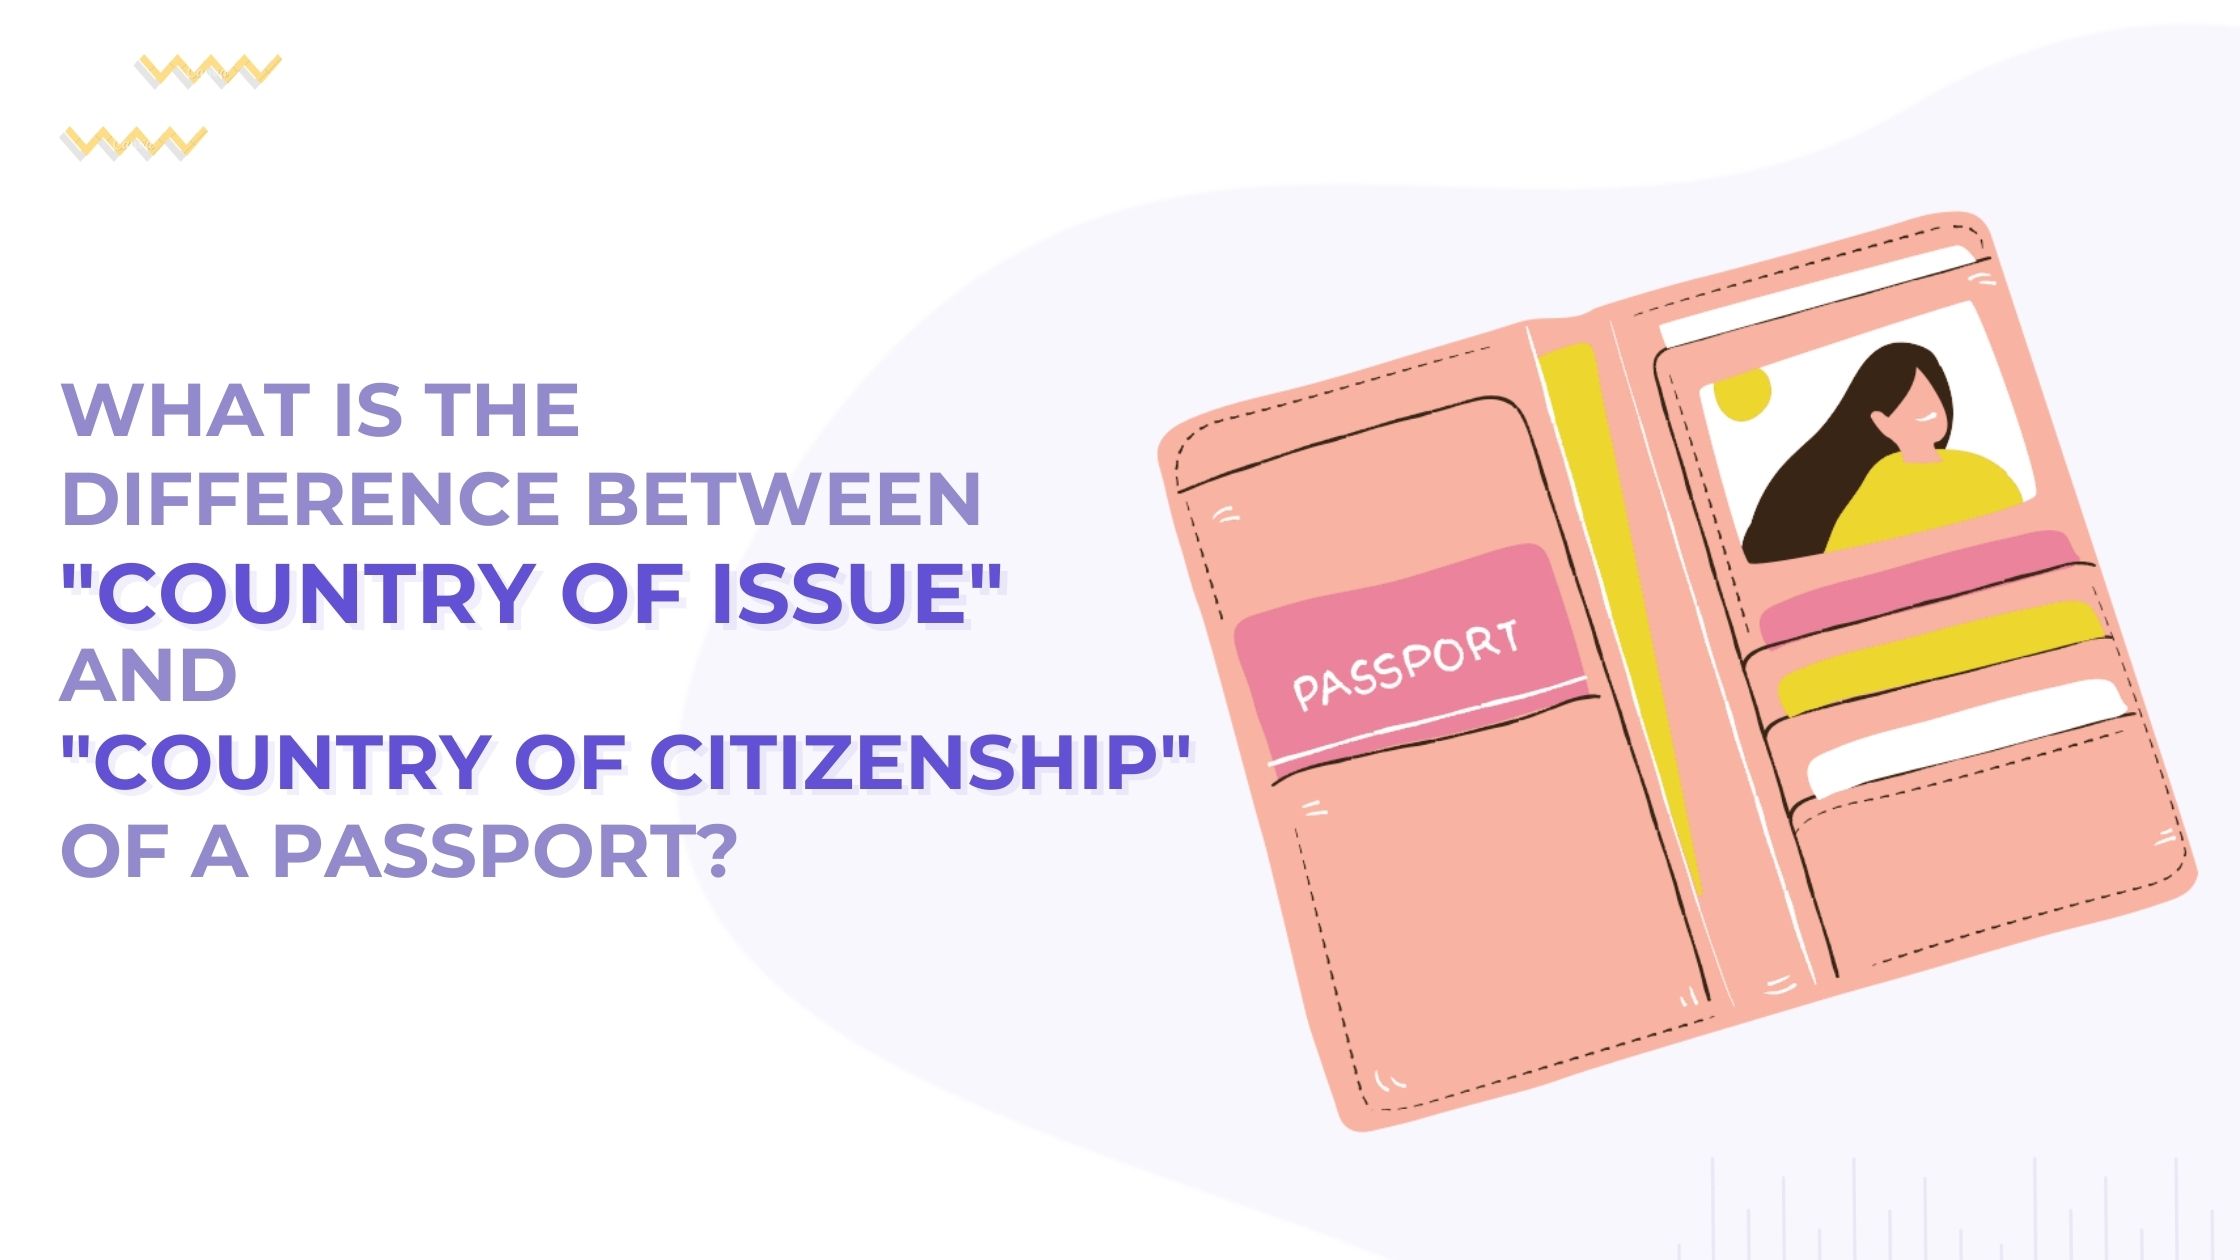 What Is The Difference Between the “Country of Issue” and “Country of Citizenship” Of A Passport